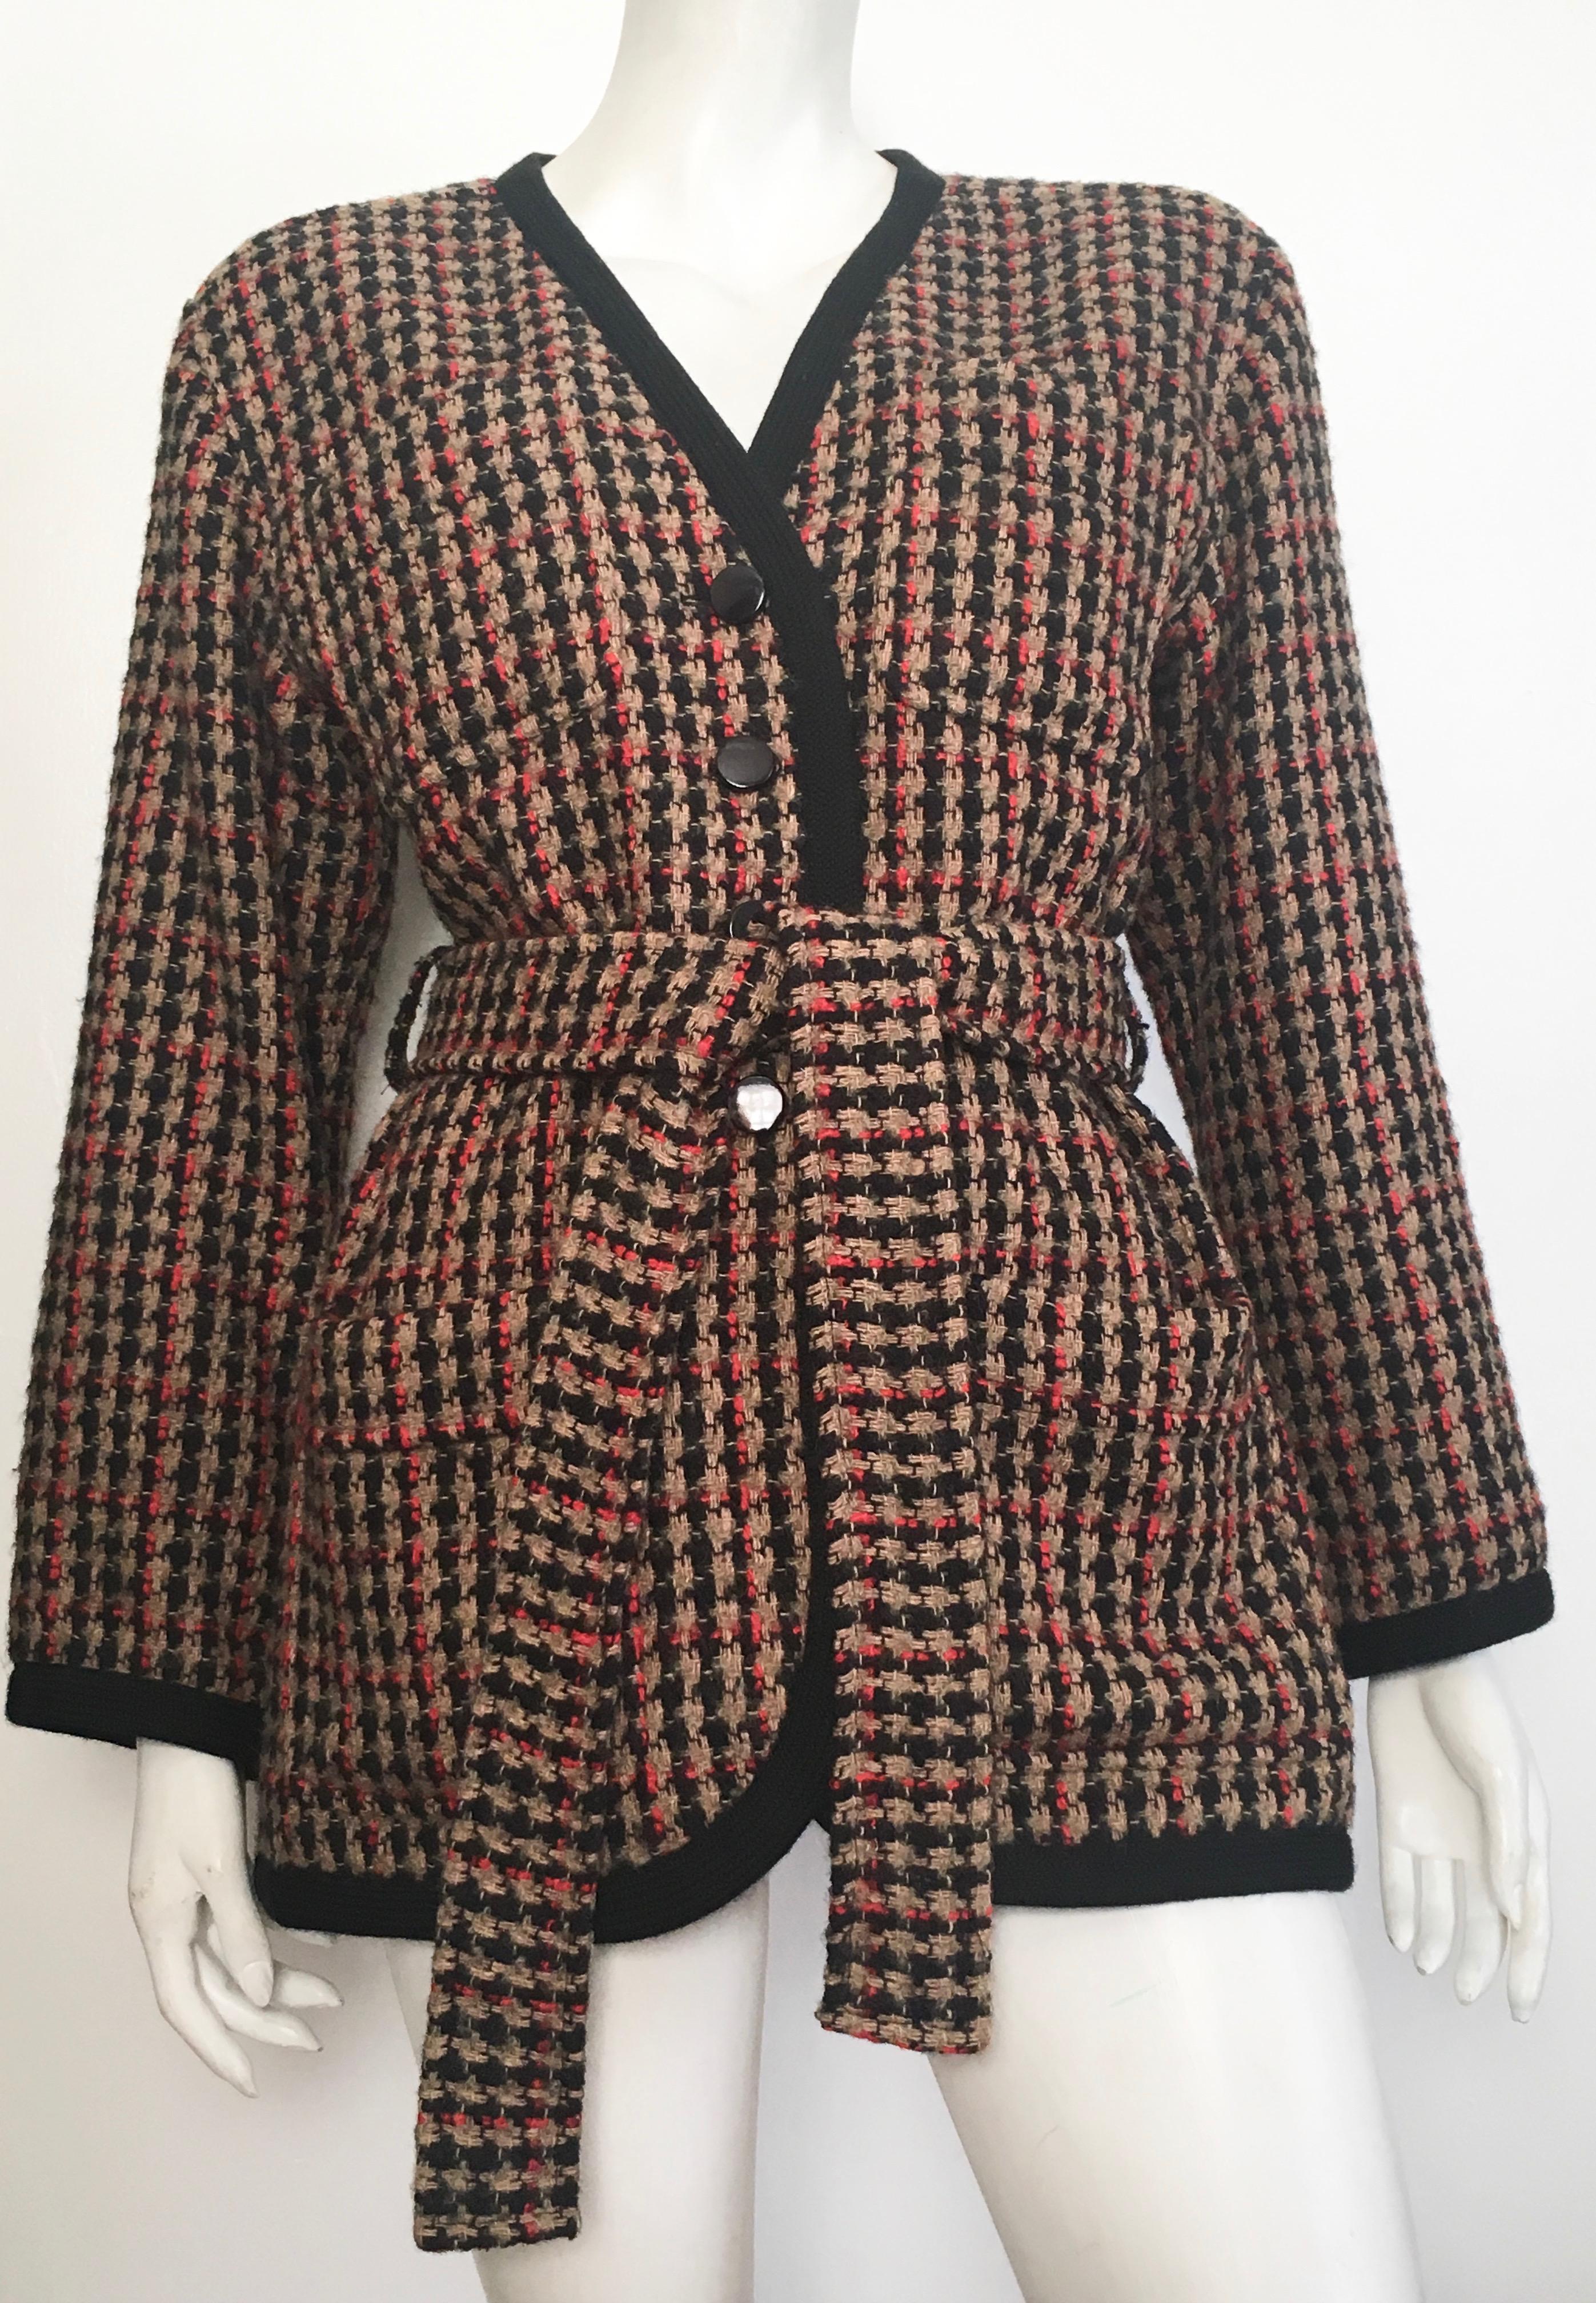 Saint Laurent 1980s wool belted jacket is a French size 38 and fits a size 6.  This ultra stylish belted jacket with pockets is the classic example of the word 'timeless'. Jacket is lined and has mild shoulder pads.  As a stylist I would put this